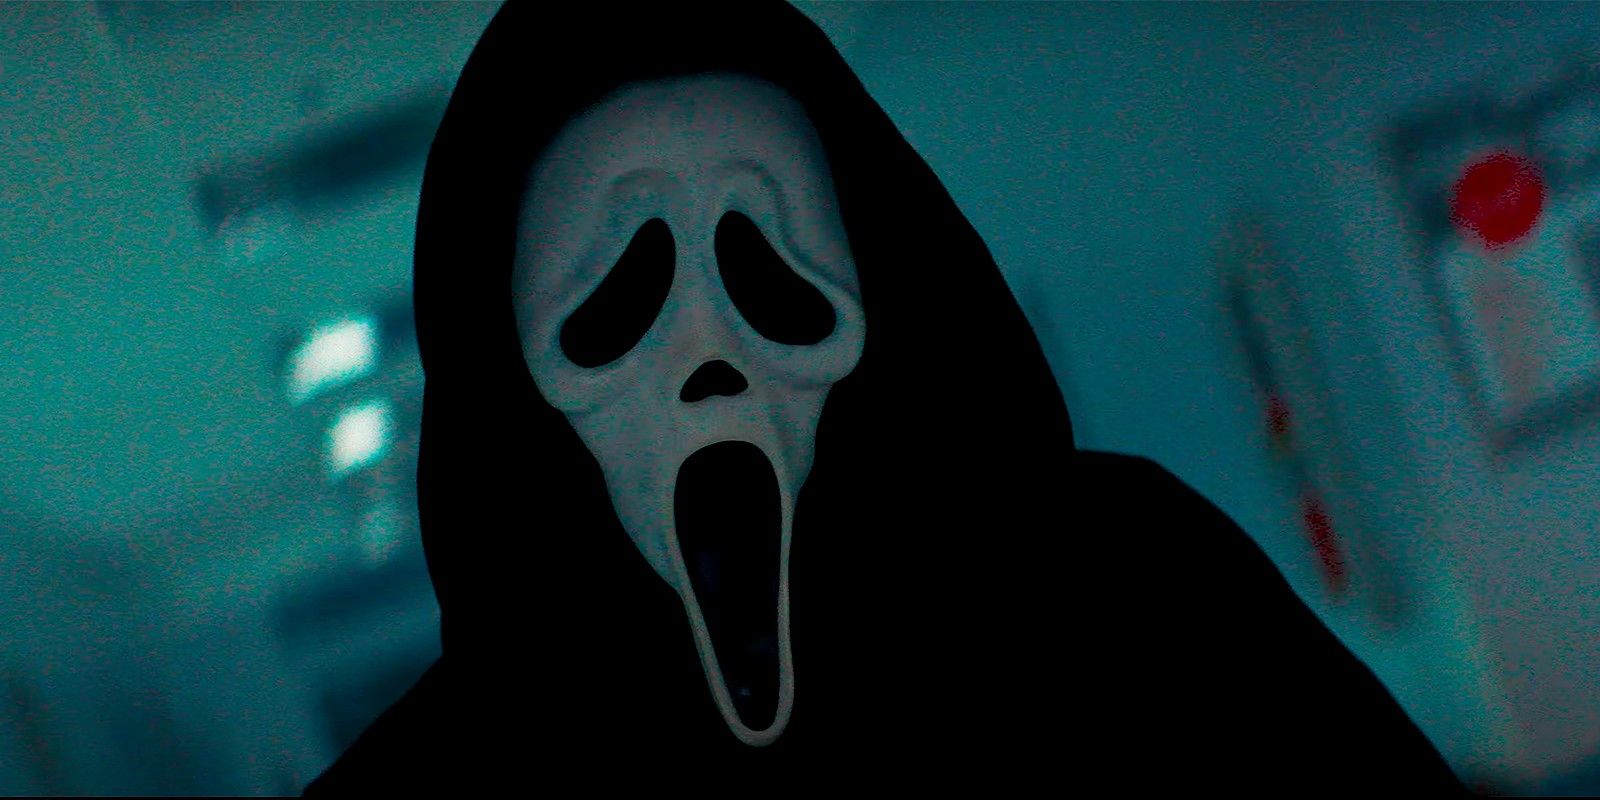 Scream 2022 Trailer Filled With Intentional Misdirection For Whodunit